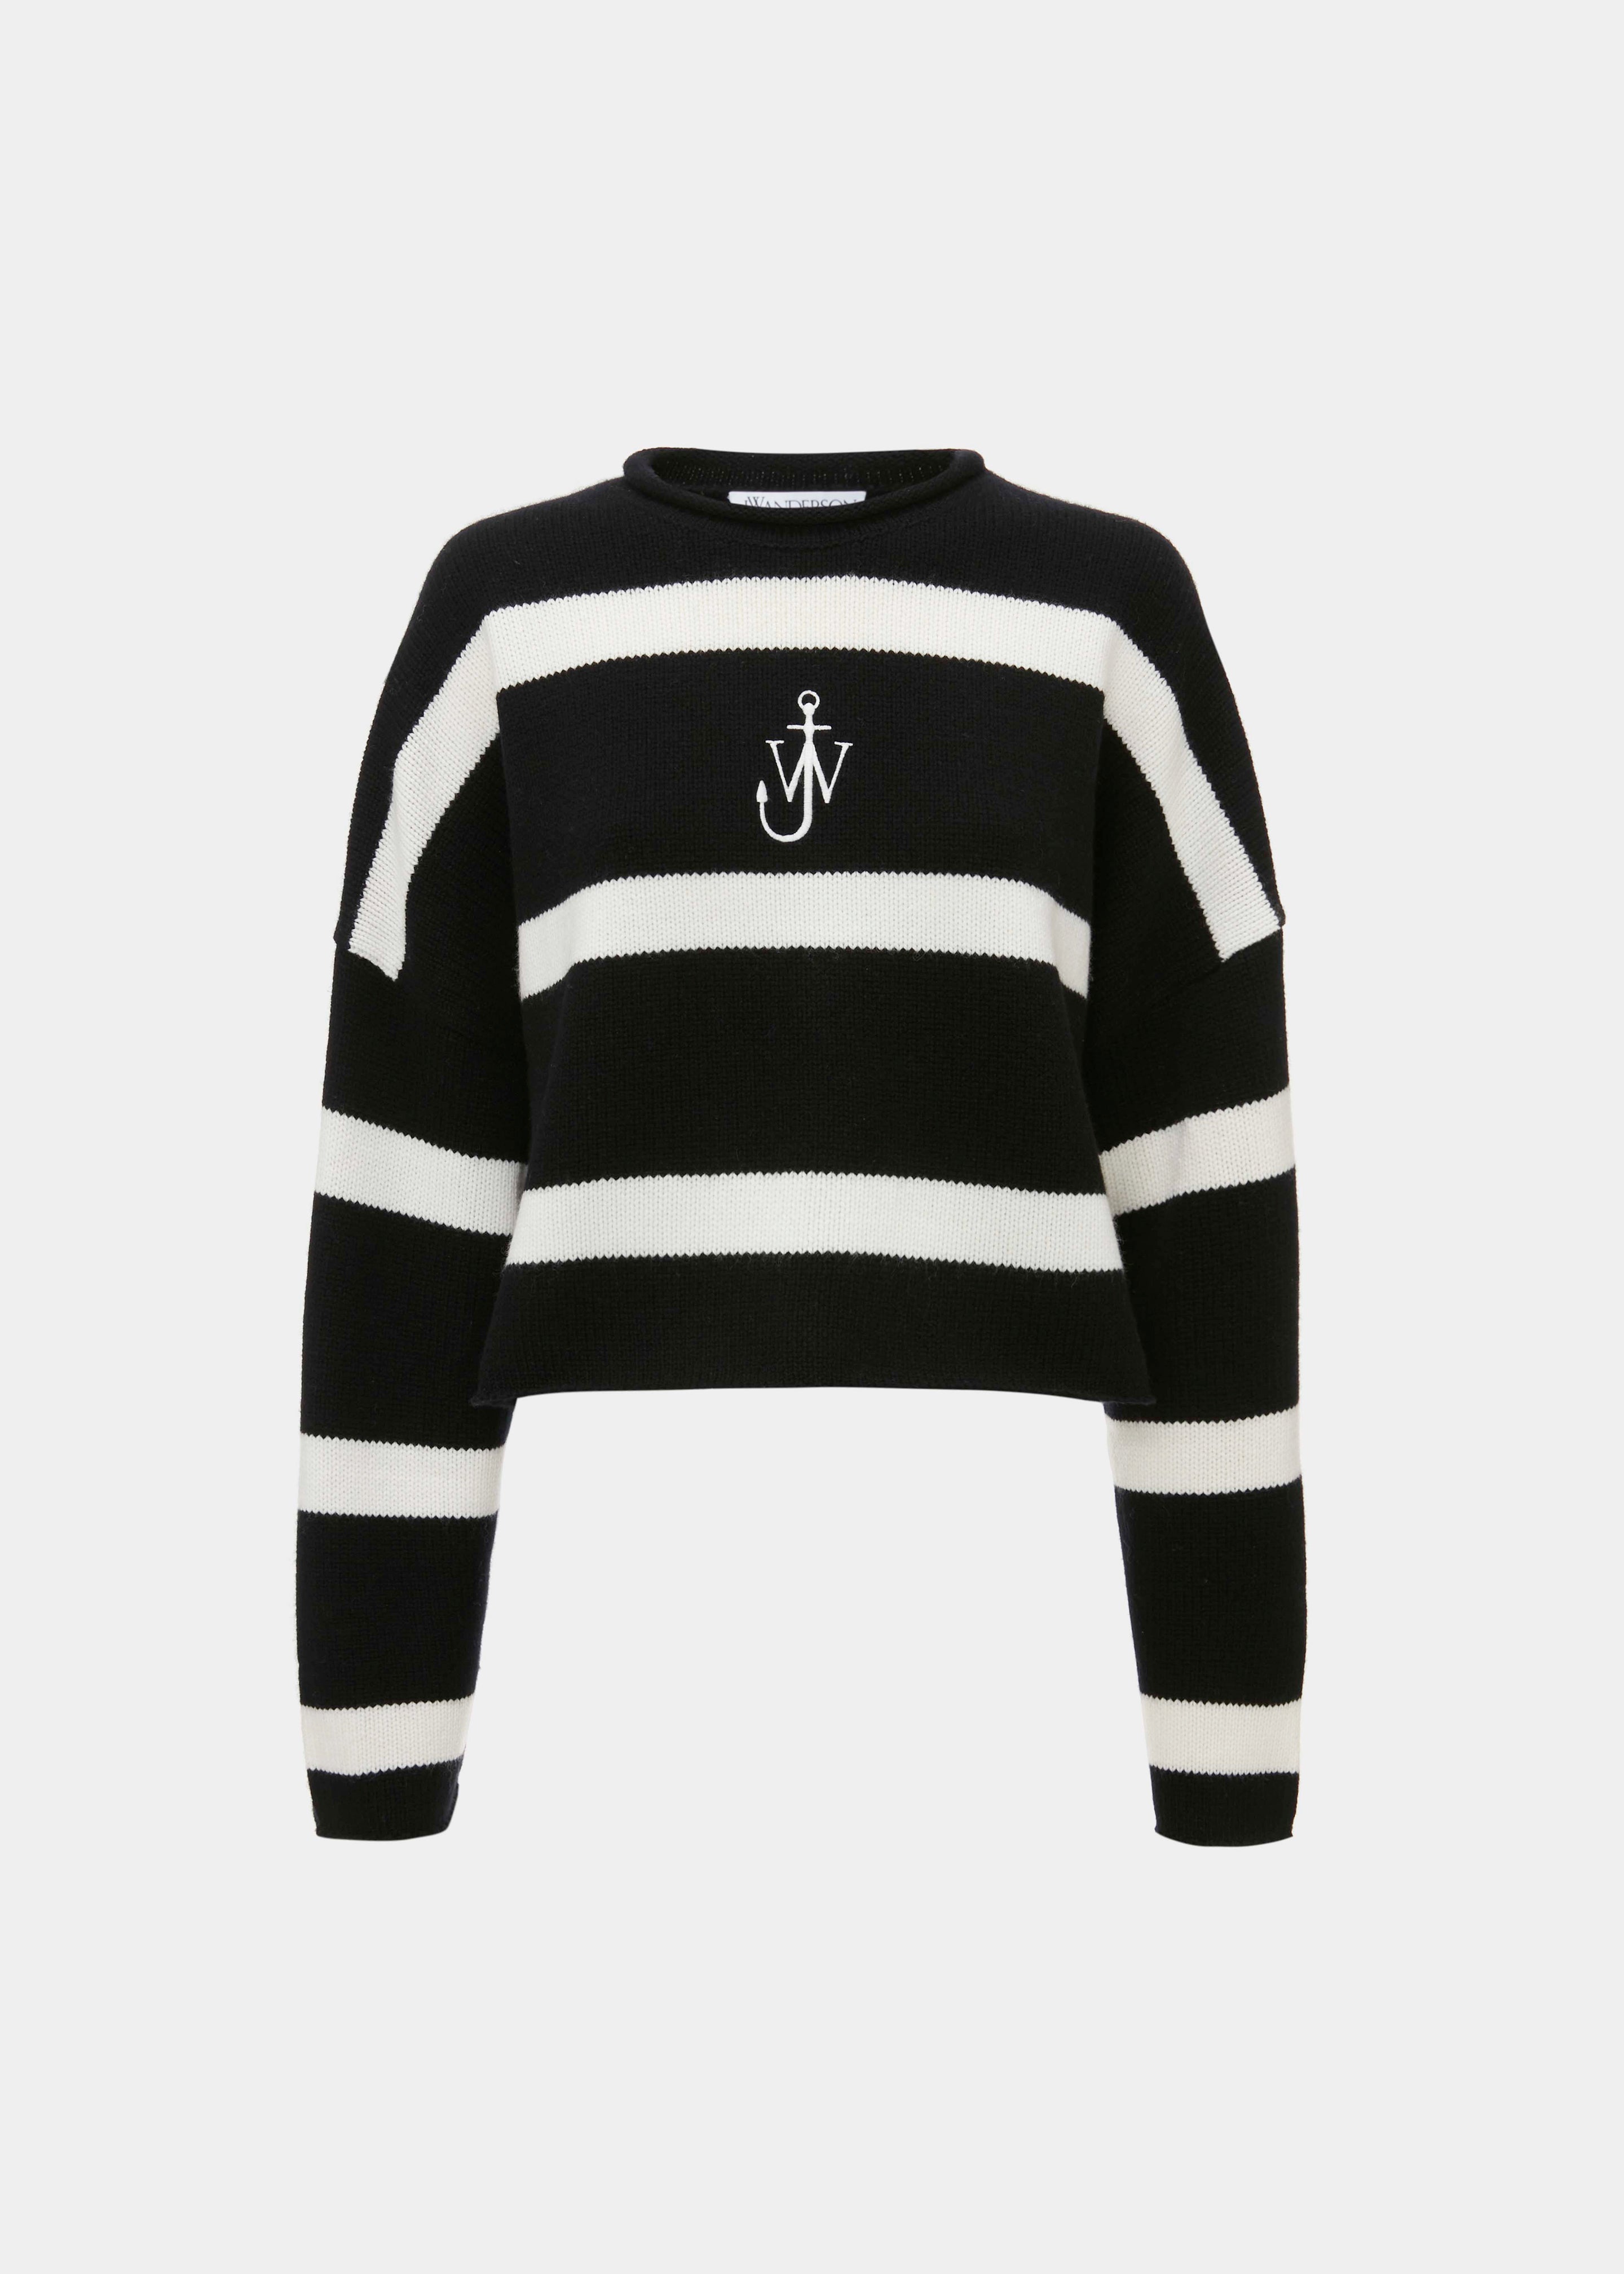 JW Anderson Cropped Anchor Jumper - Black/White - 6